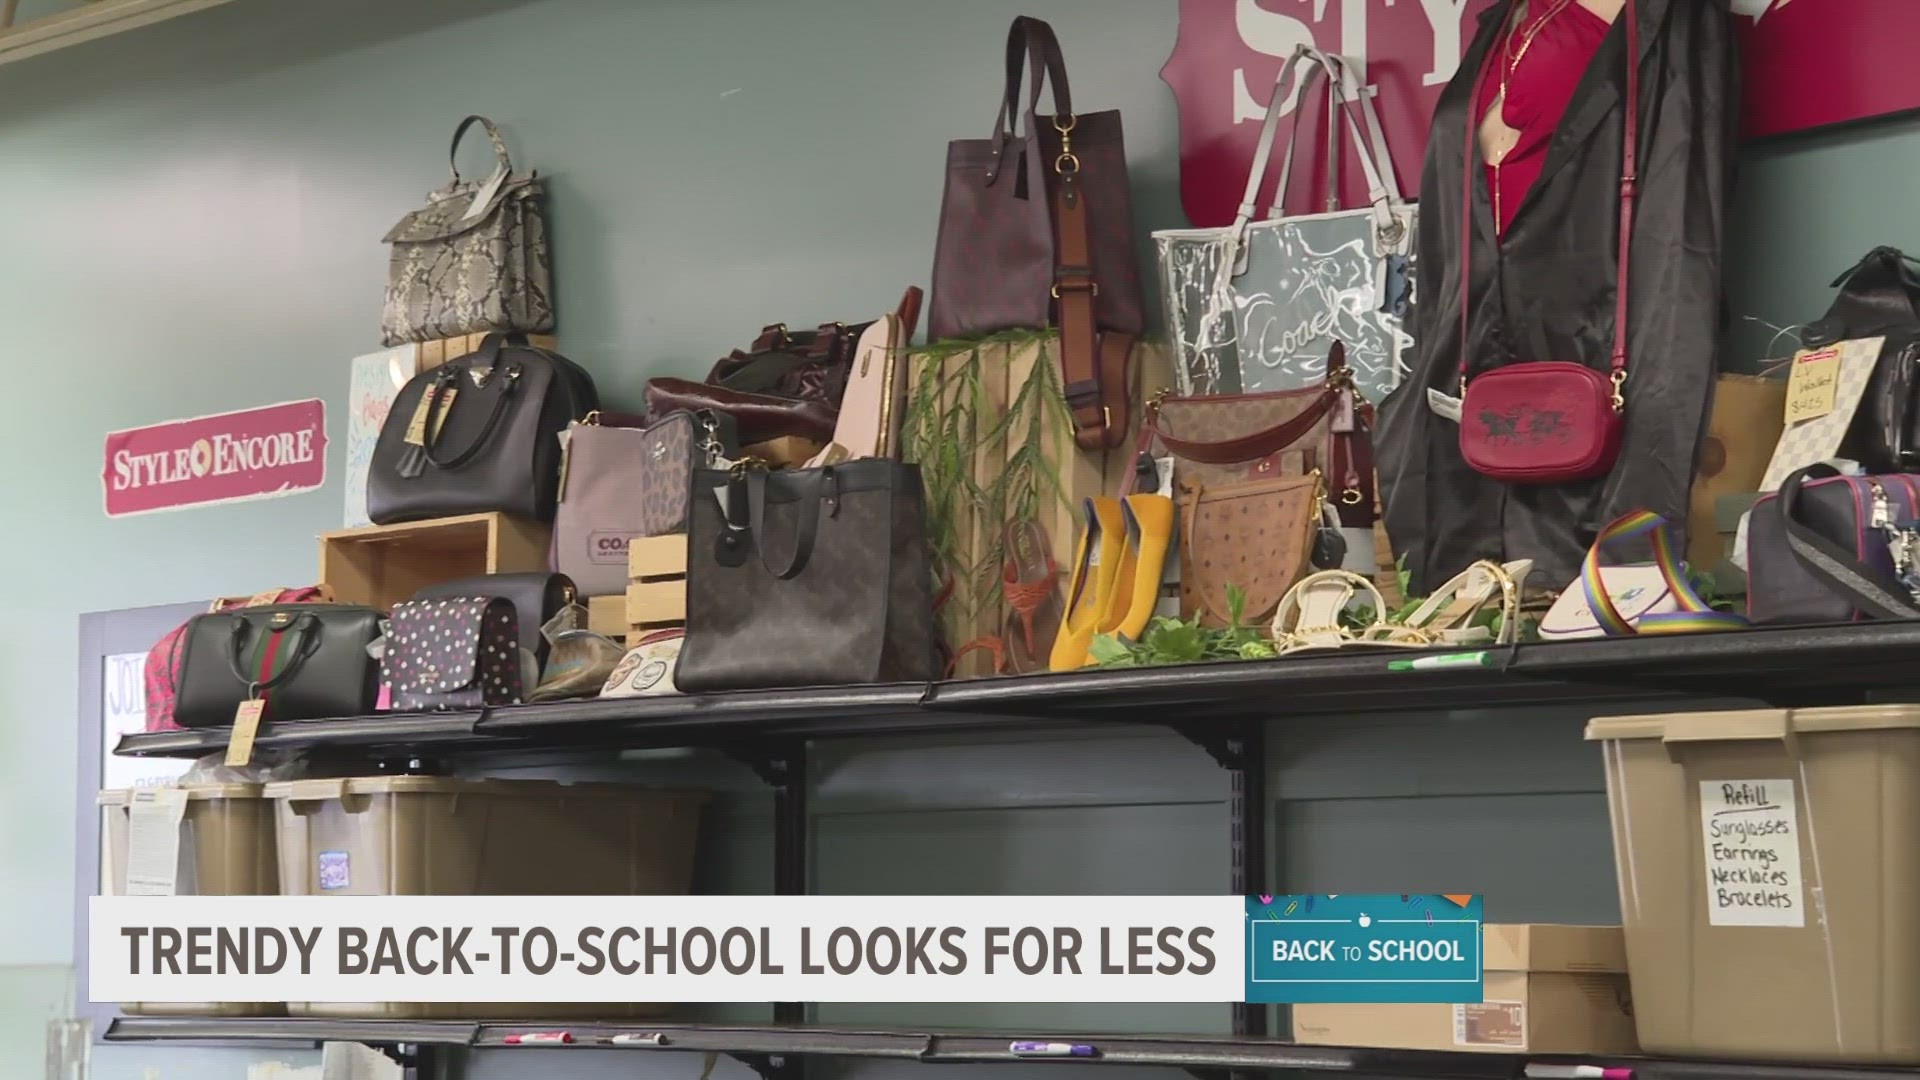 Not all your back-to-school looks have to be brand new. Style Encore buys and sells gently-used items with locations throughout West Michigan.